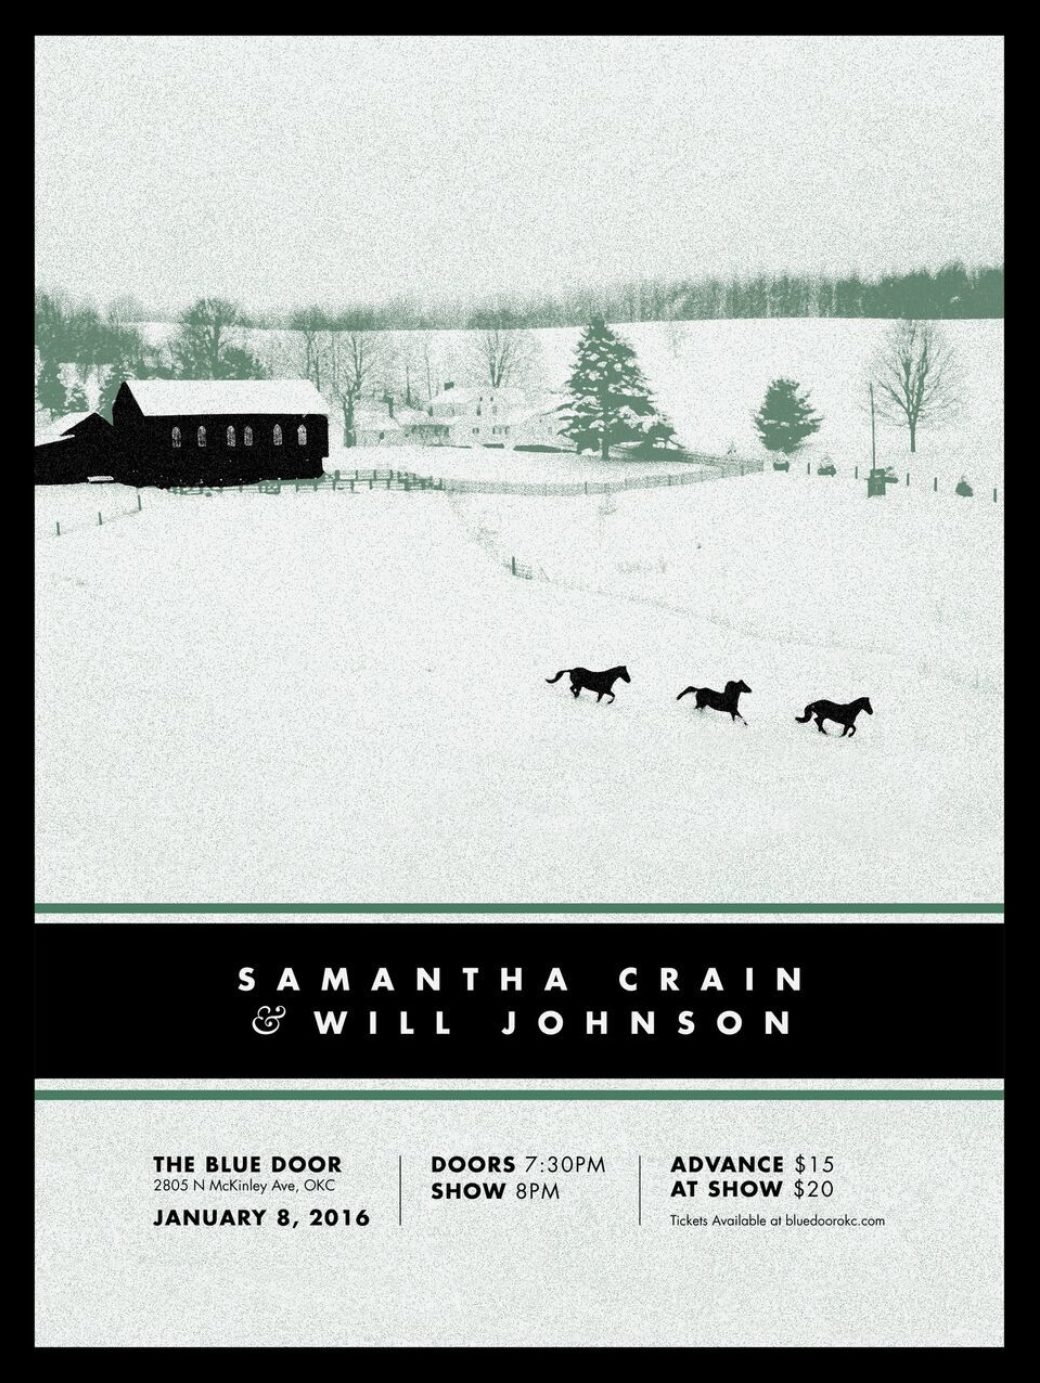 A concert poster featuring a snowy barn and three black horses with horizontal text that reads  “SAMANTHA CRAIN & WILL JOHNSON”